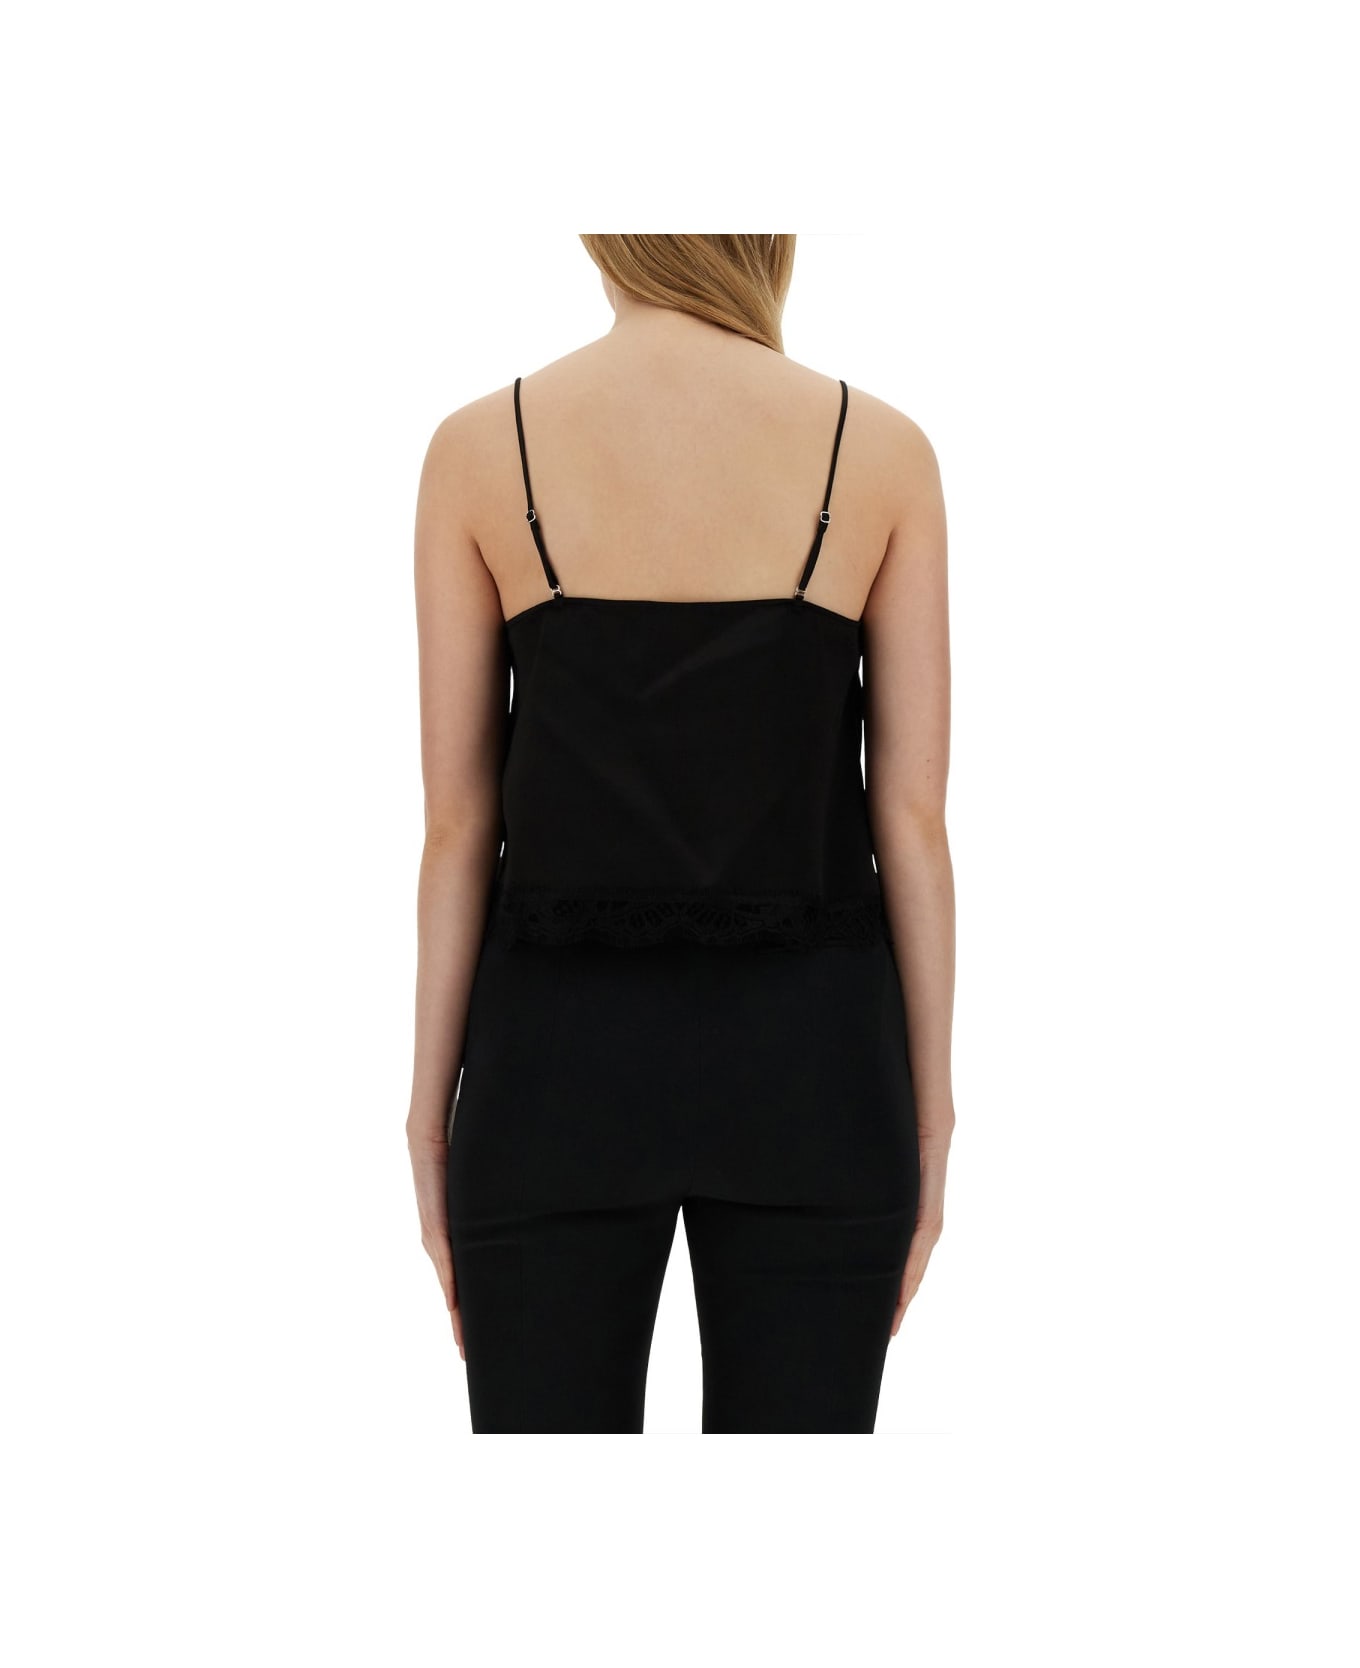 Alexander McQueen Top With Thin Straps - BLACK